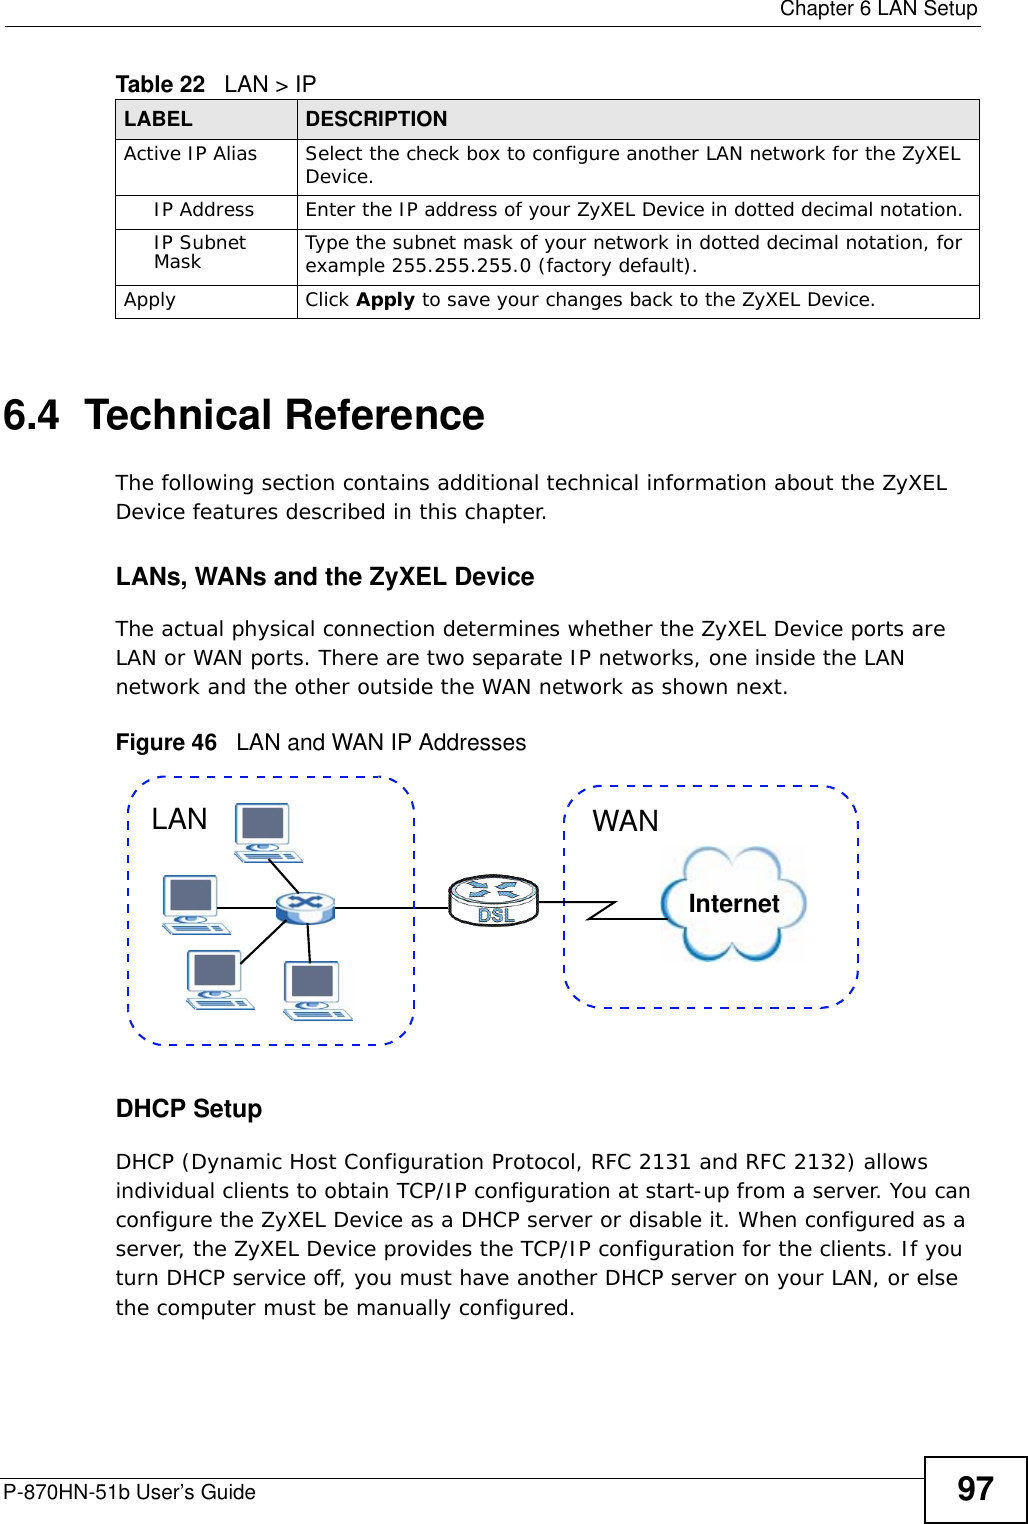  Chapter 6 LAN SetupP-870HN-51b User’s Guide 976.4  Technical ReferenceThe following section contains additional technical information about the ZyXEL Device features described in this chapter.LANs, WANs and the ZyXEL DeviceThe actual physical connection determines whether the ZyXEL Device ports are LAN or WAN ports. There are two separate IP networks, one inside the LAN network and the other outside the WAN network as shown next.Figure 46   LAN and WAN IP AddressesDHCP SetupDHCP (Dynamic Host Configuration Protocol, RFC 2131 and RFC 2132) allows individual clients to obtain TCP/IP configuration at start-up from a server. You can configure the ZyXEL Device as a DHCP server or disable it. When configured as a server, the ZyXEL Device provides the TCP/IP configuration for the clients. If you turn DHCP service off, you must have another DHCP server on your LAN, or else the computer must be manually configured. Active IP Alias  Select the check box to configure another LAN network for the ZyXEL Device.IP Address Enter the IP address of your ZyXEL Device in dotted decimal notation. IP Subnet Mask Type the subnet mask of your network in dotted decimal notation, for example 255.255.255.0 (factory default).Apply Click Apply to save your changes back to the ZyXEL Device.Table 22   LAN &gt; IPLABEL DESCRIPTIONInternetWANLAN